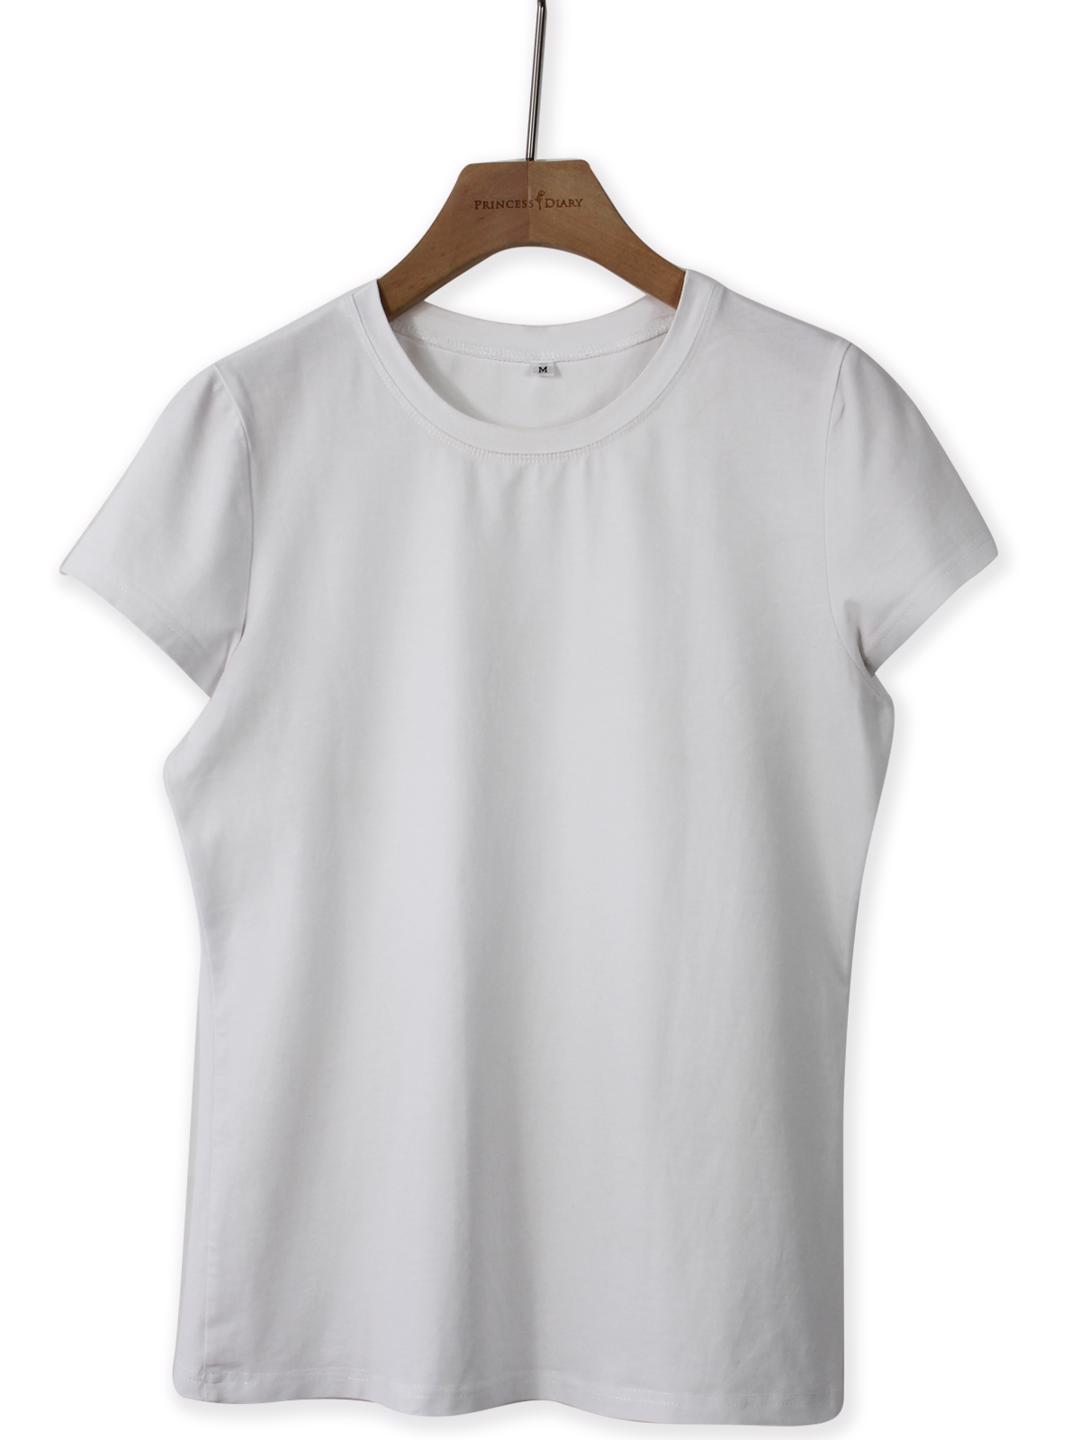 Simple T-Shirt-Simple Fashion for everyday wear from Princess-diary.com